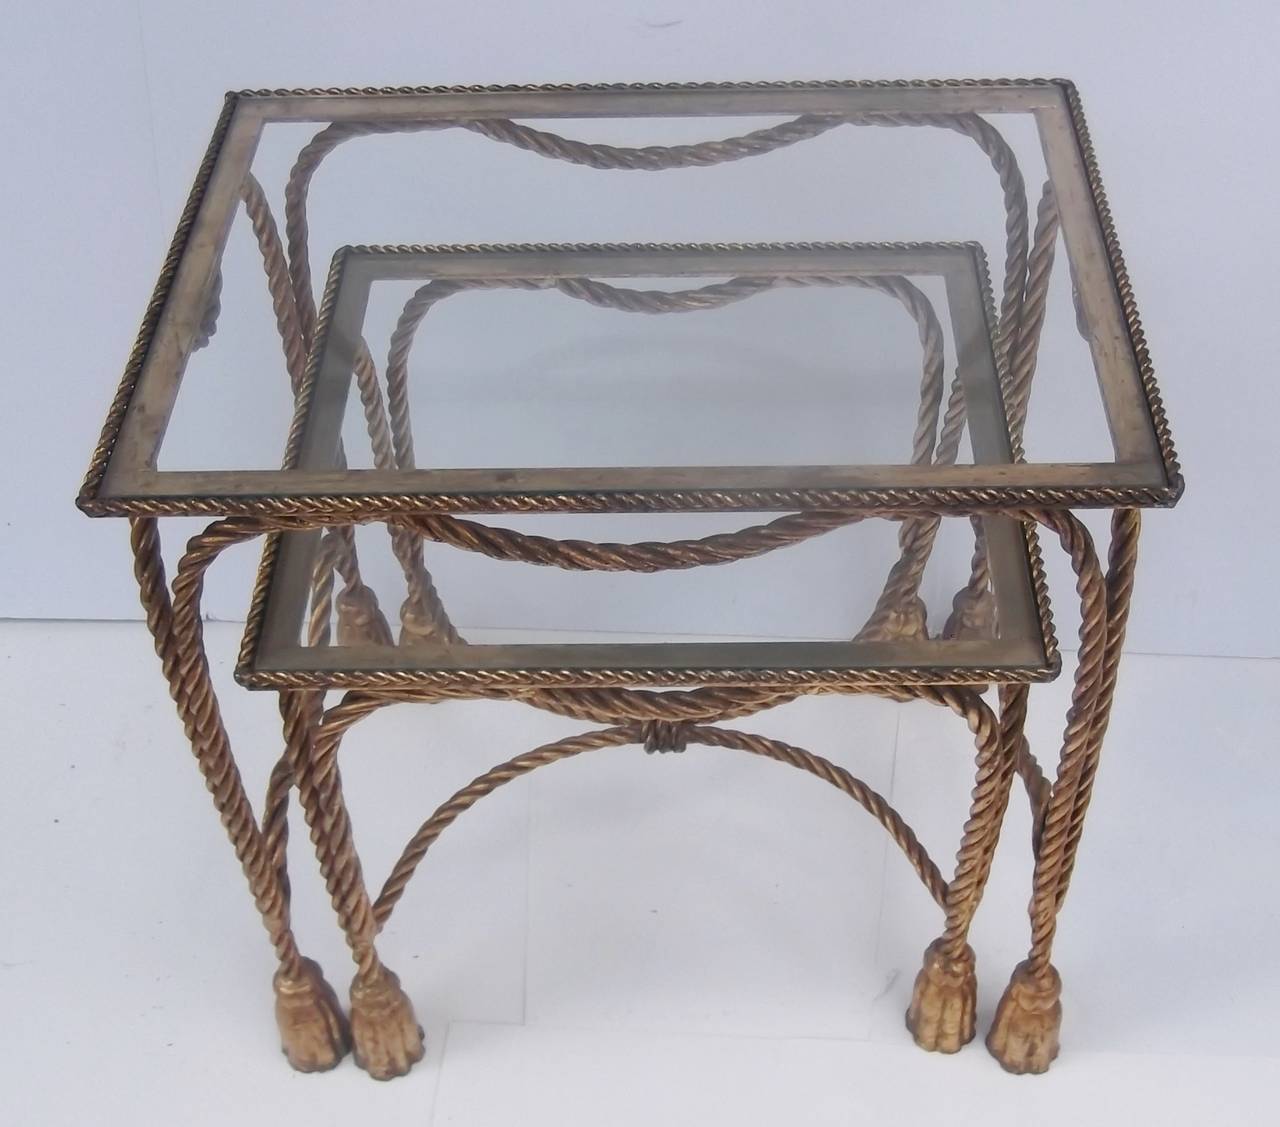 Made in Italy, these are a nice set of whimsical nesting tables with glass tops.
The frames are rope style gilded iron with fitted glass top inserts all resting on tassel motif feet. This was a poplar style in the 1950-1960 and tables, chairs and